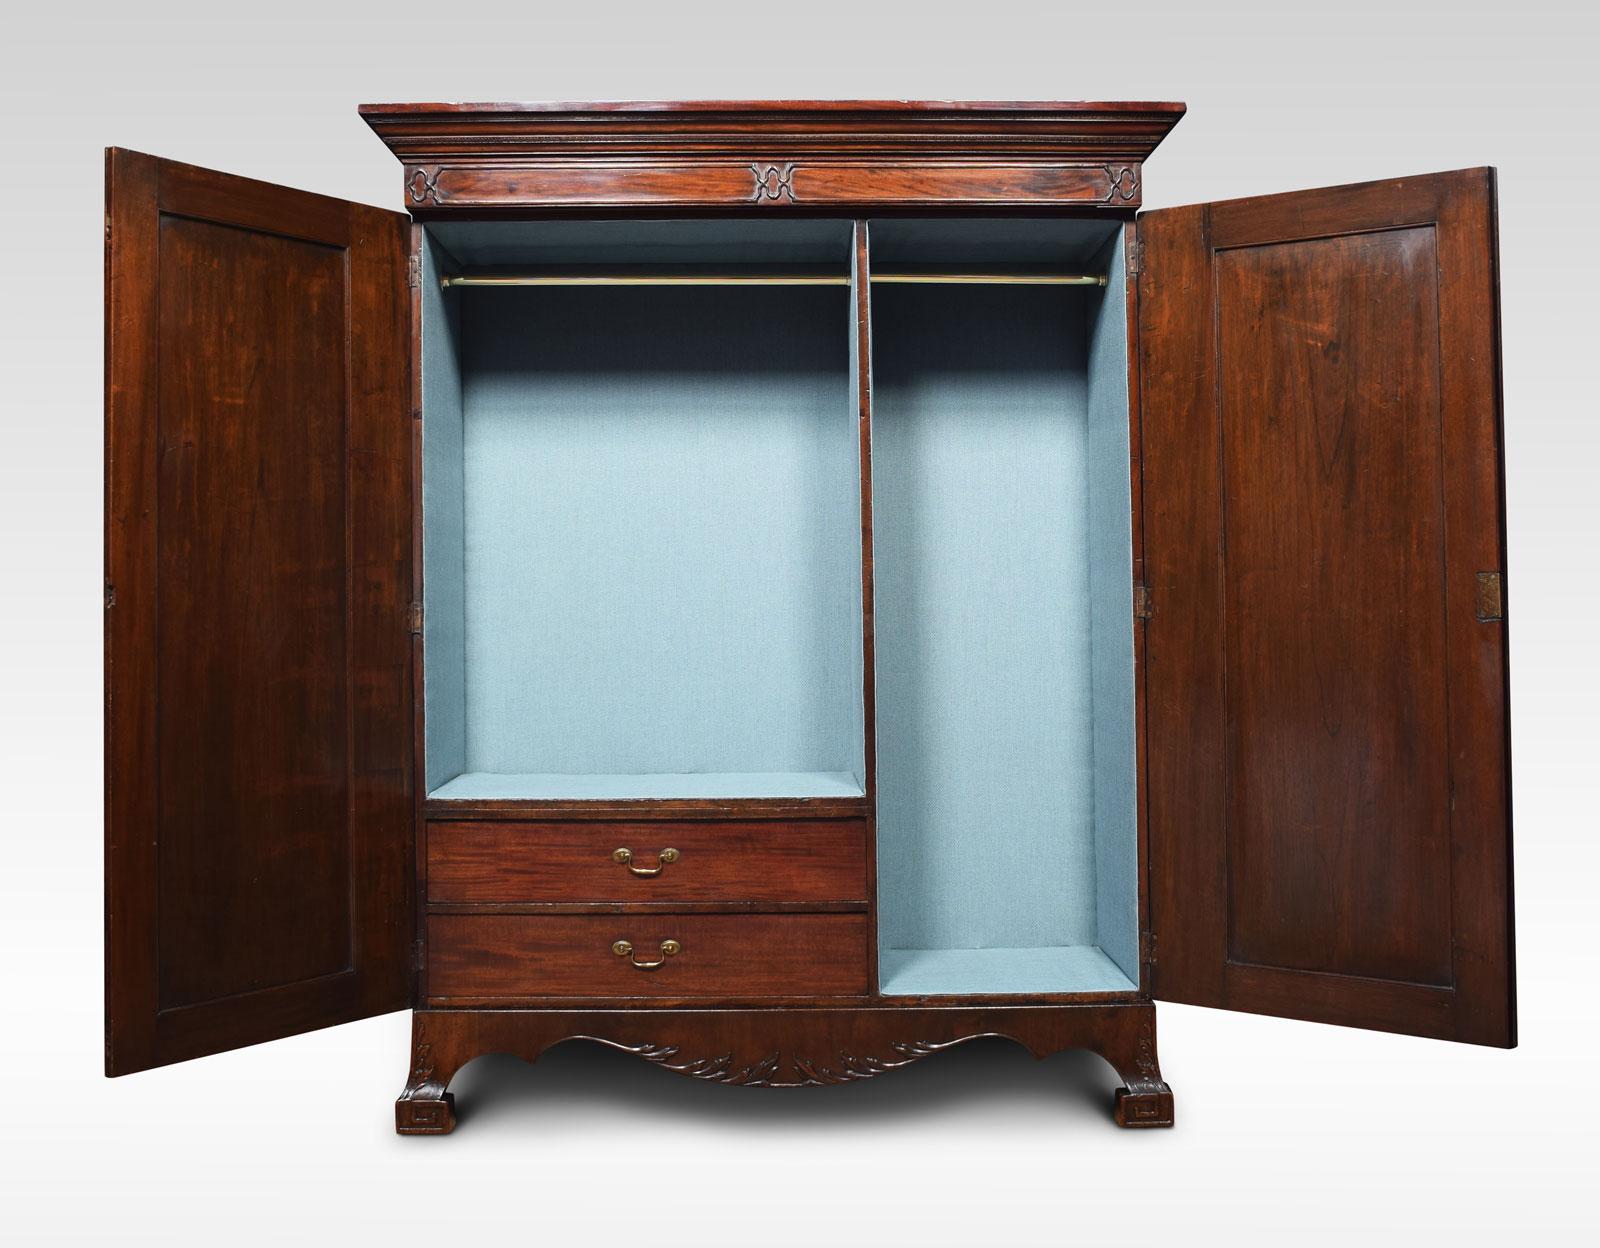 George III style mahogany wardrobe. The outset cornice above a moulded frieze and two paneled blind fret doors opening to reveal hanging space and two short drawers to the base with brass swan-neck handles. All raised up on large bracket